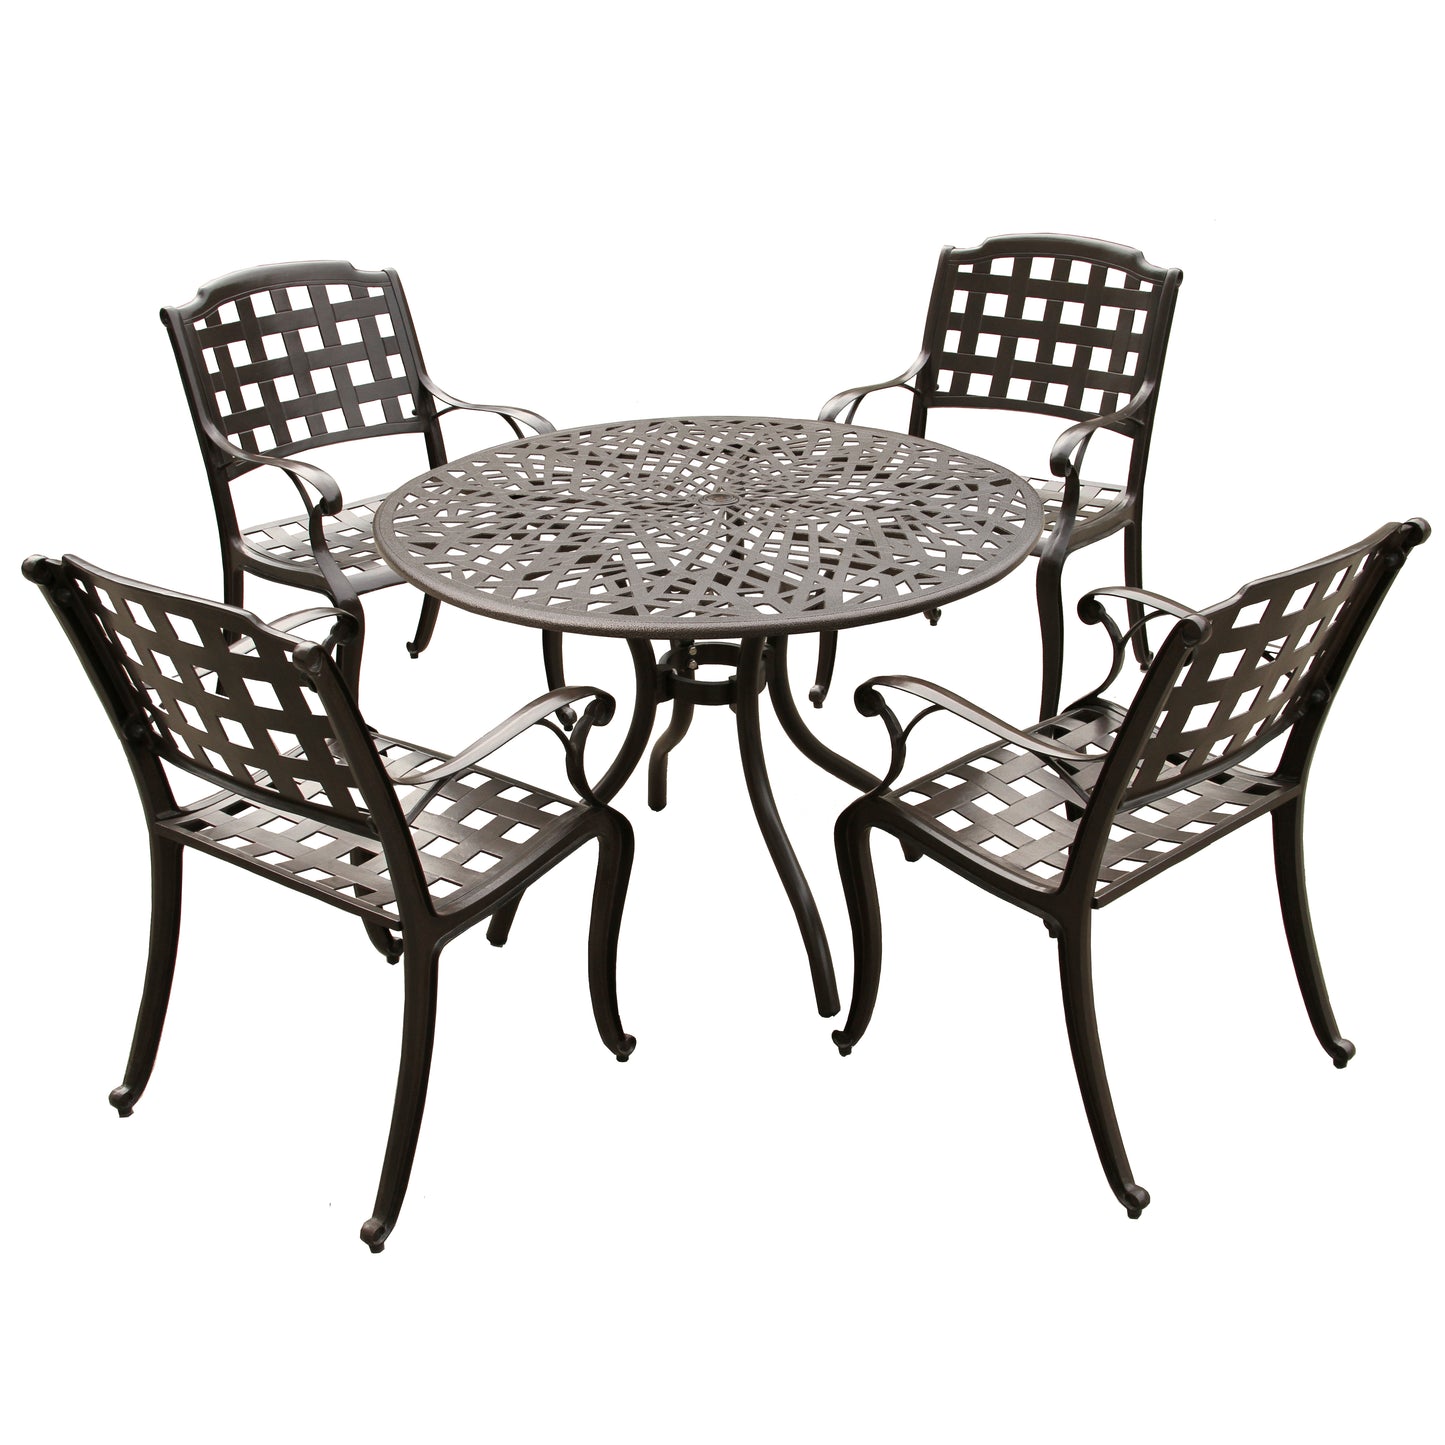 Outdoor Aluminum 5pc Round Patio Dining Set with Four Chairs